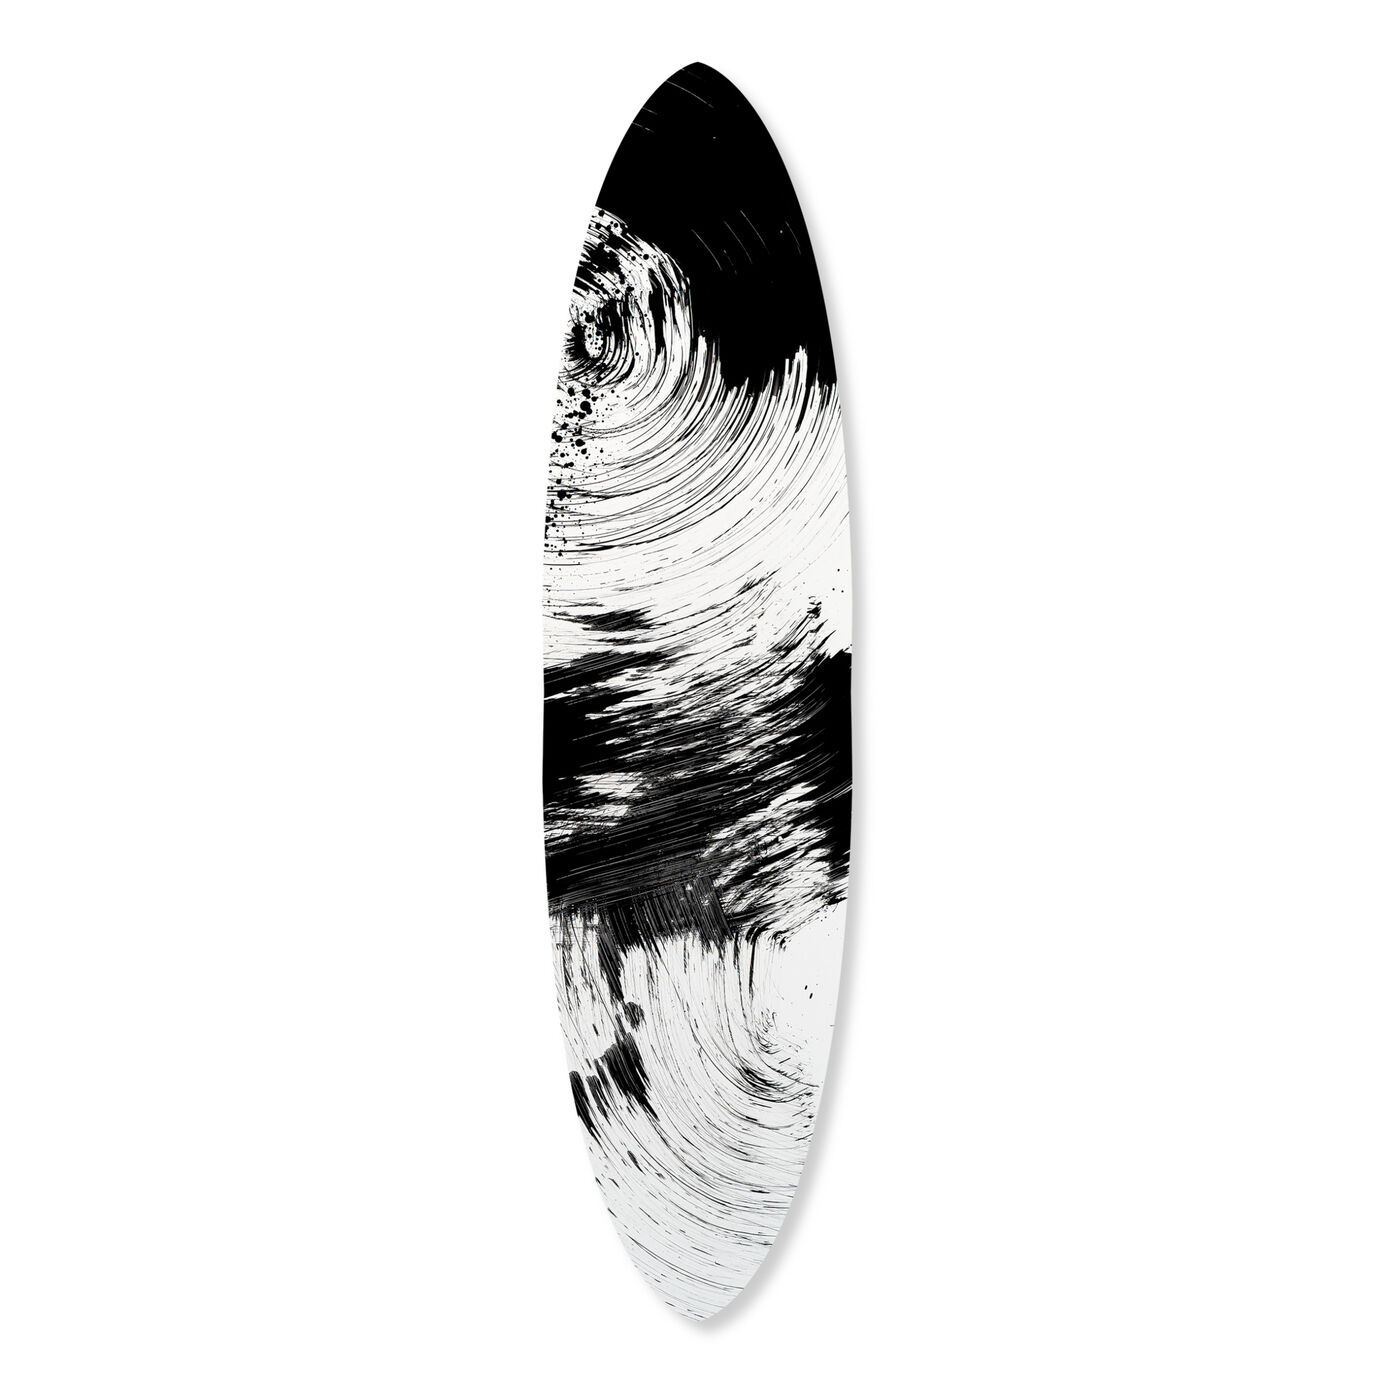 Passing Strides - Decorative Acrylic Surfboard